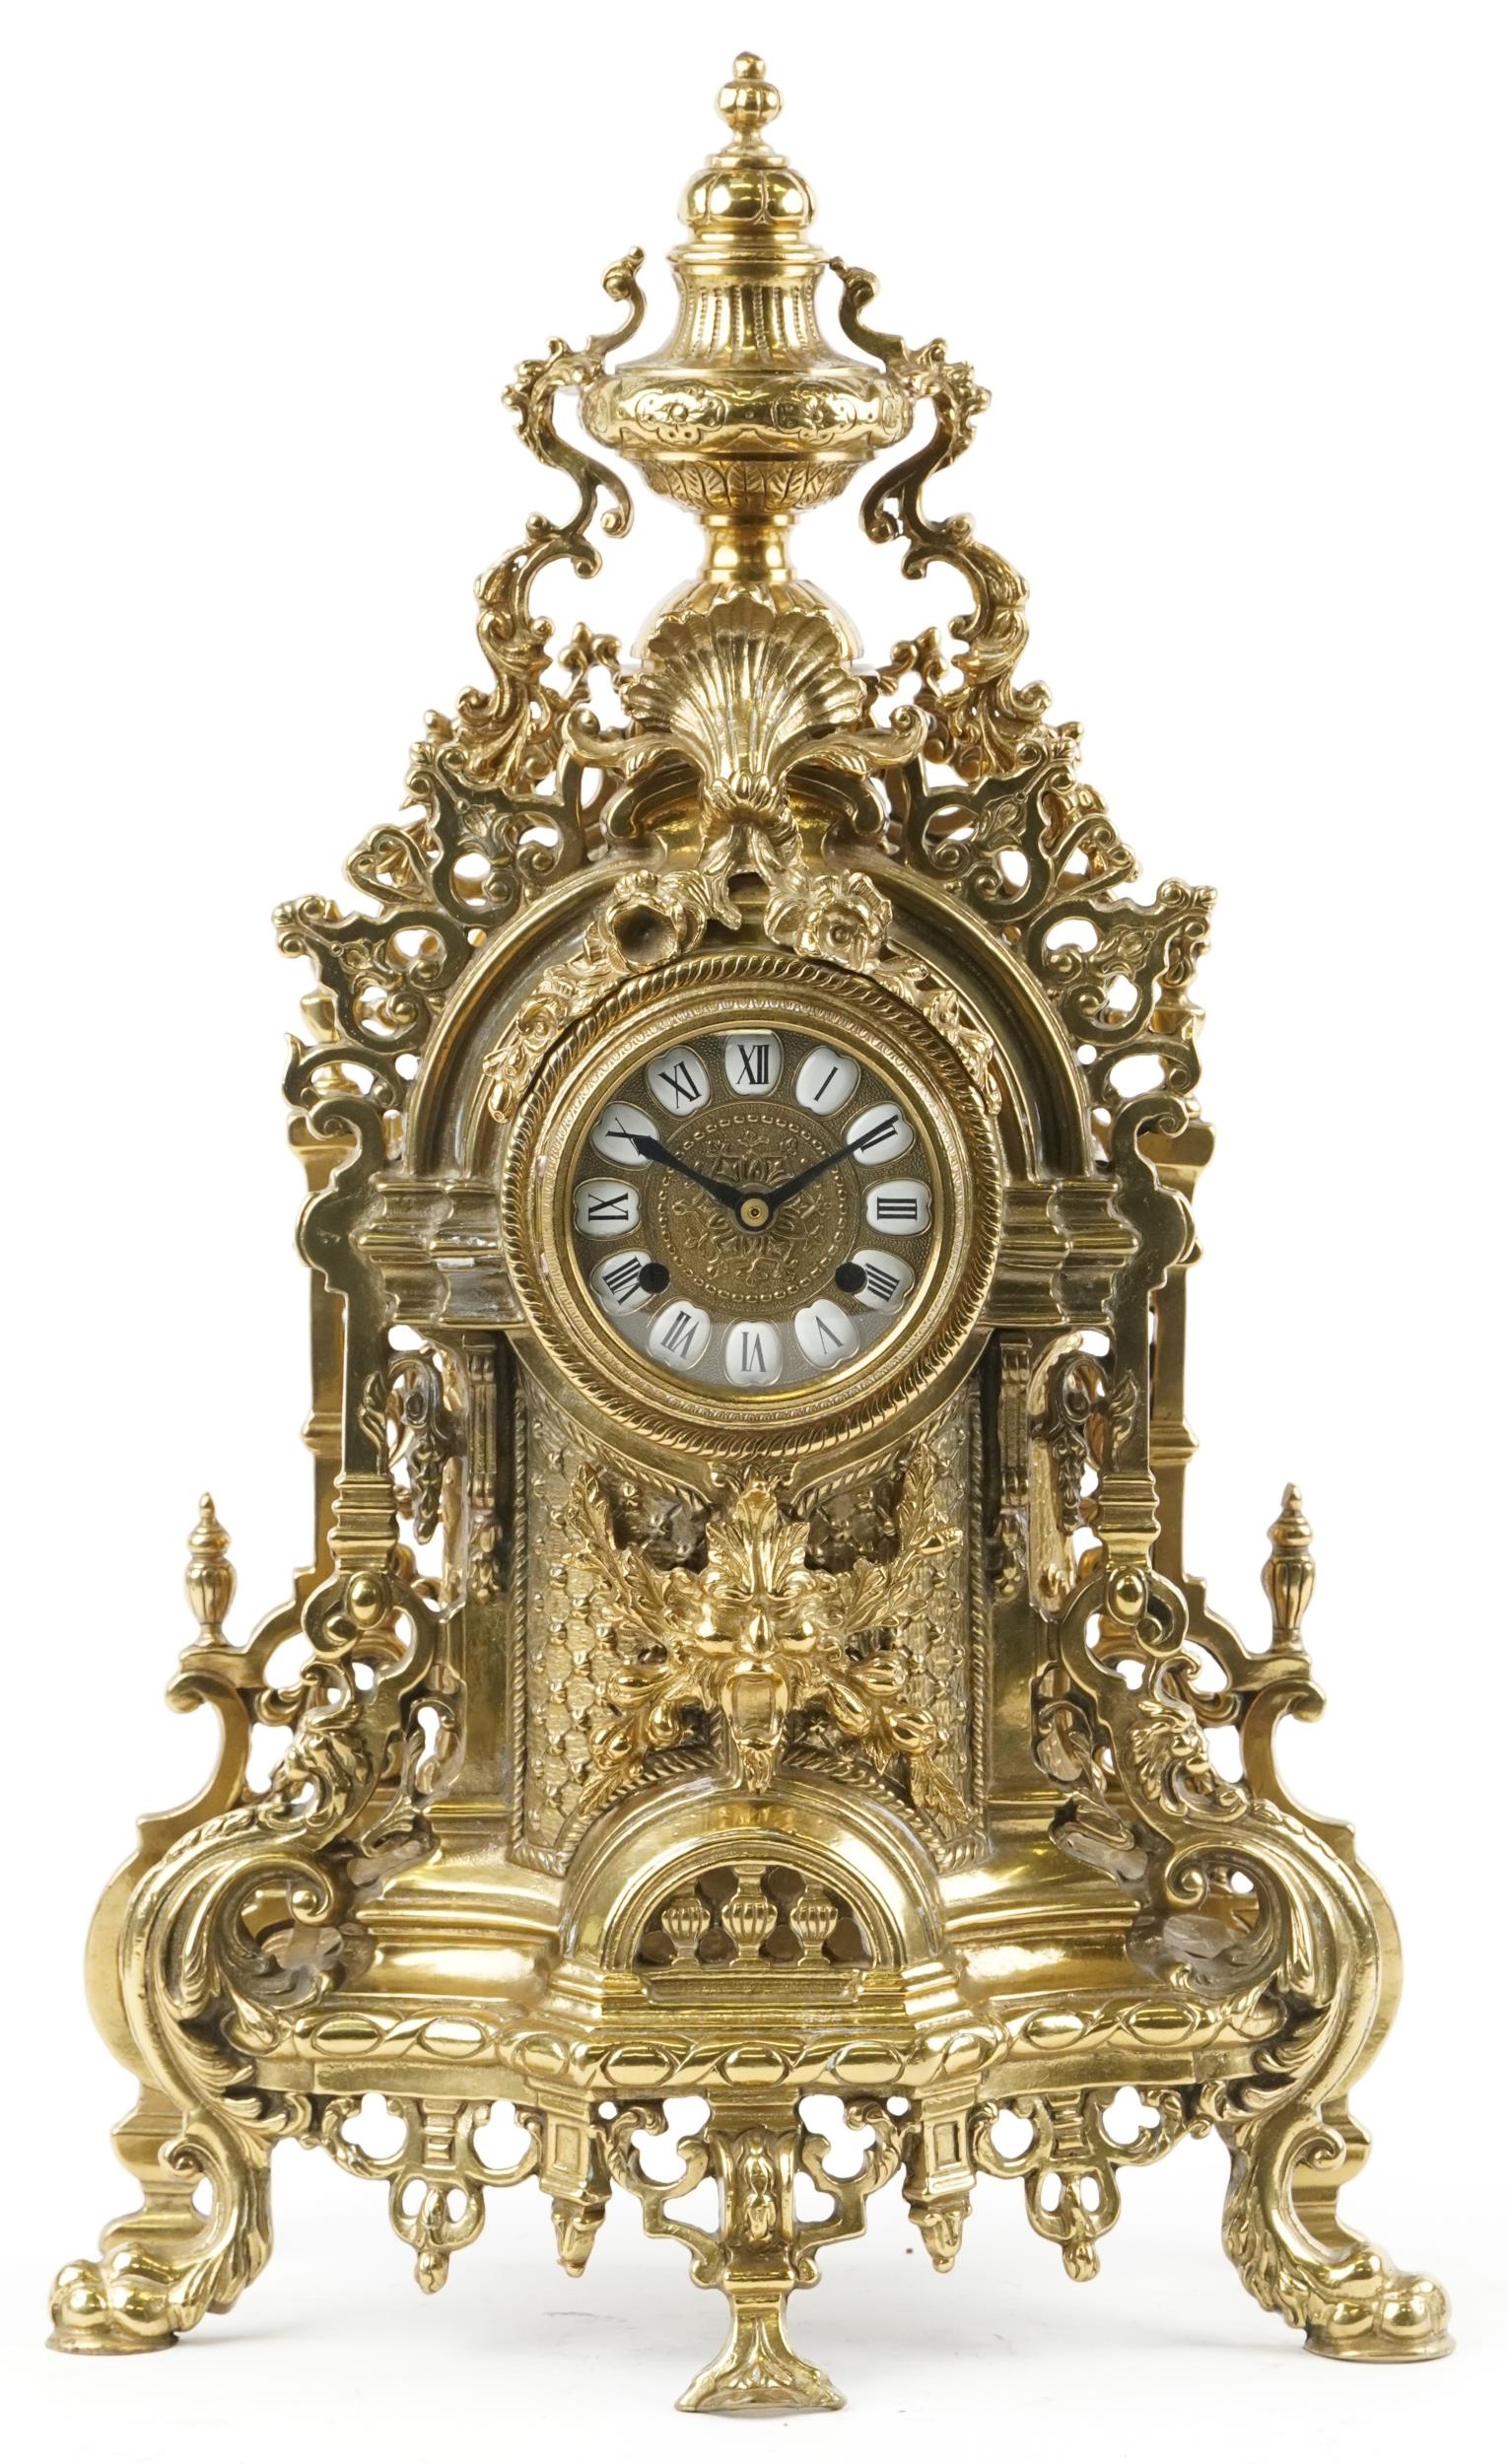 Large 19th century style classical brass mantle clock with urn finial and mask having circular